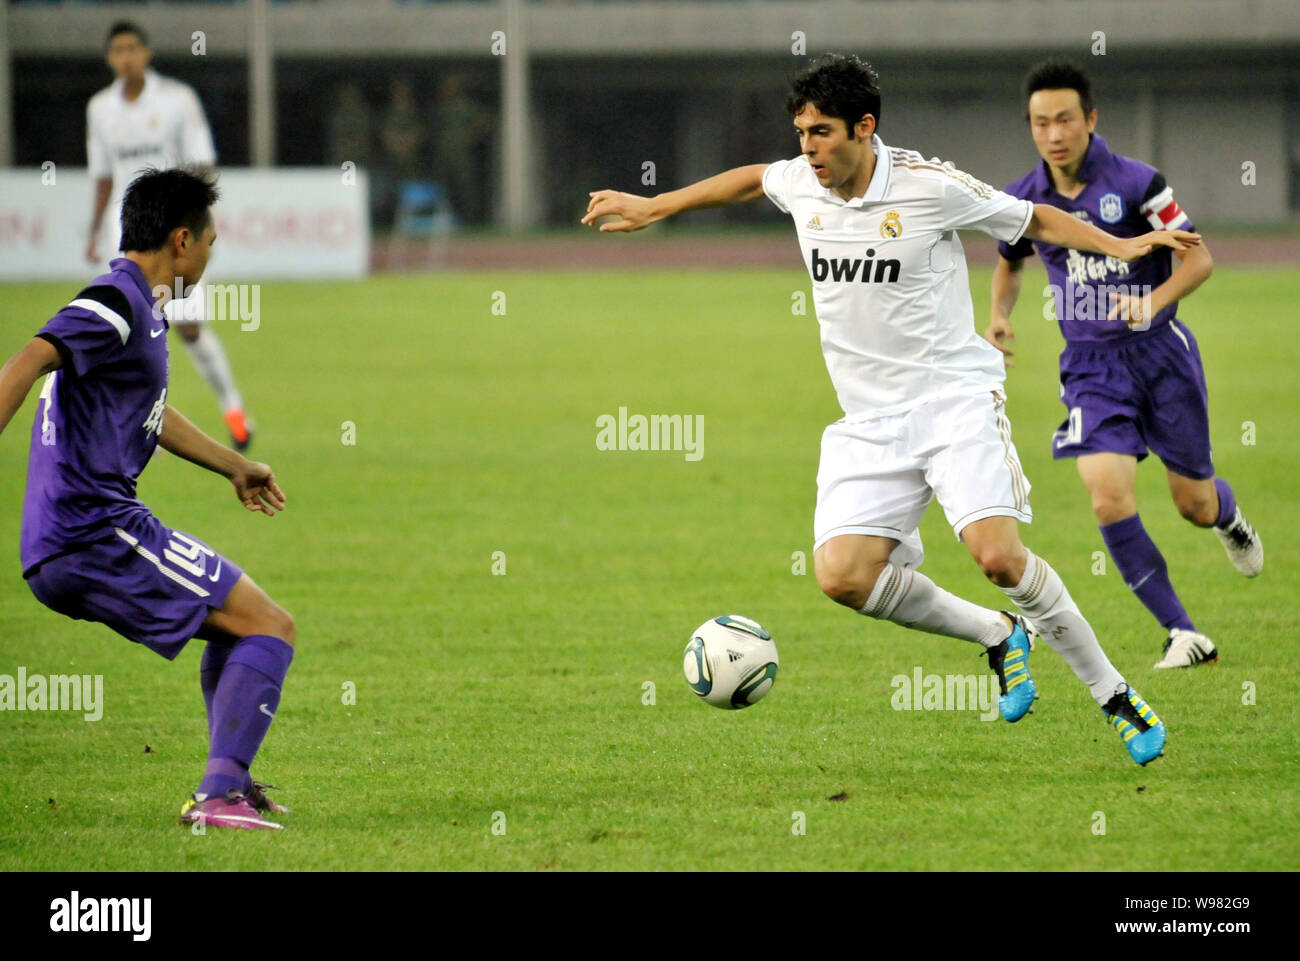 Ricardo Izecson dos Santos Leite, known as Kaka of Real Madrid, second right, challenges a football player of Tianjin Teda during a friendly soccer ma Stock Photo